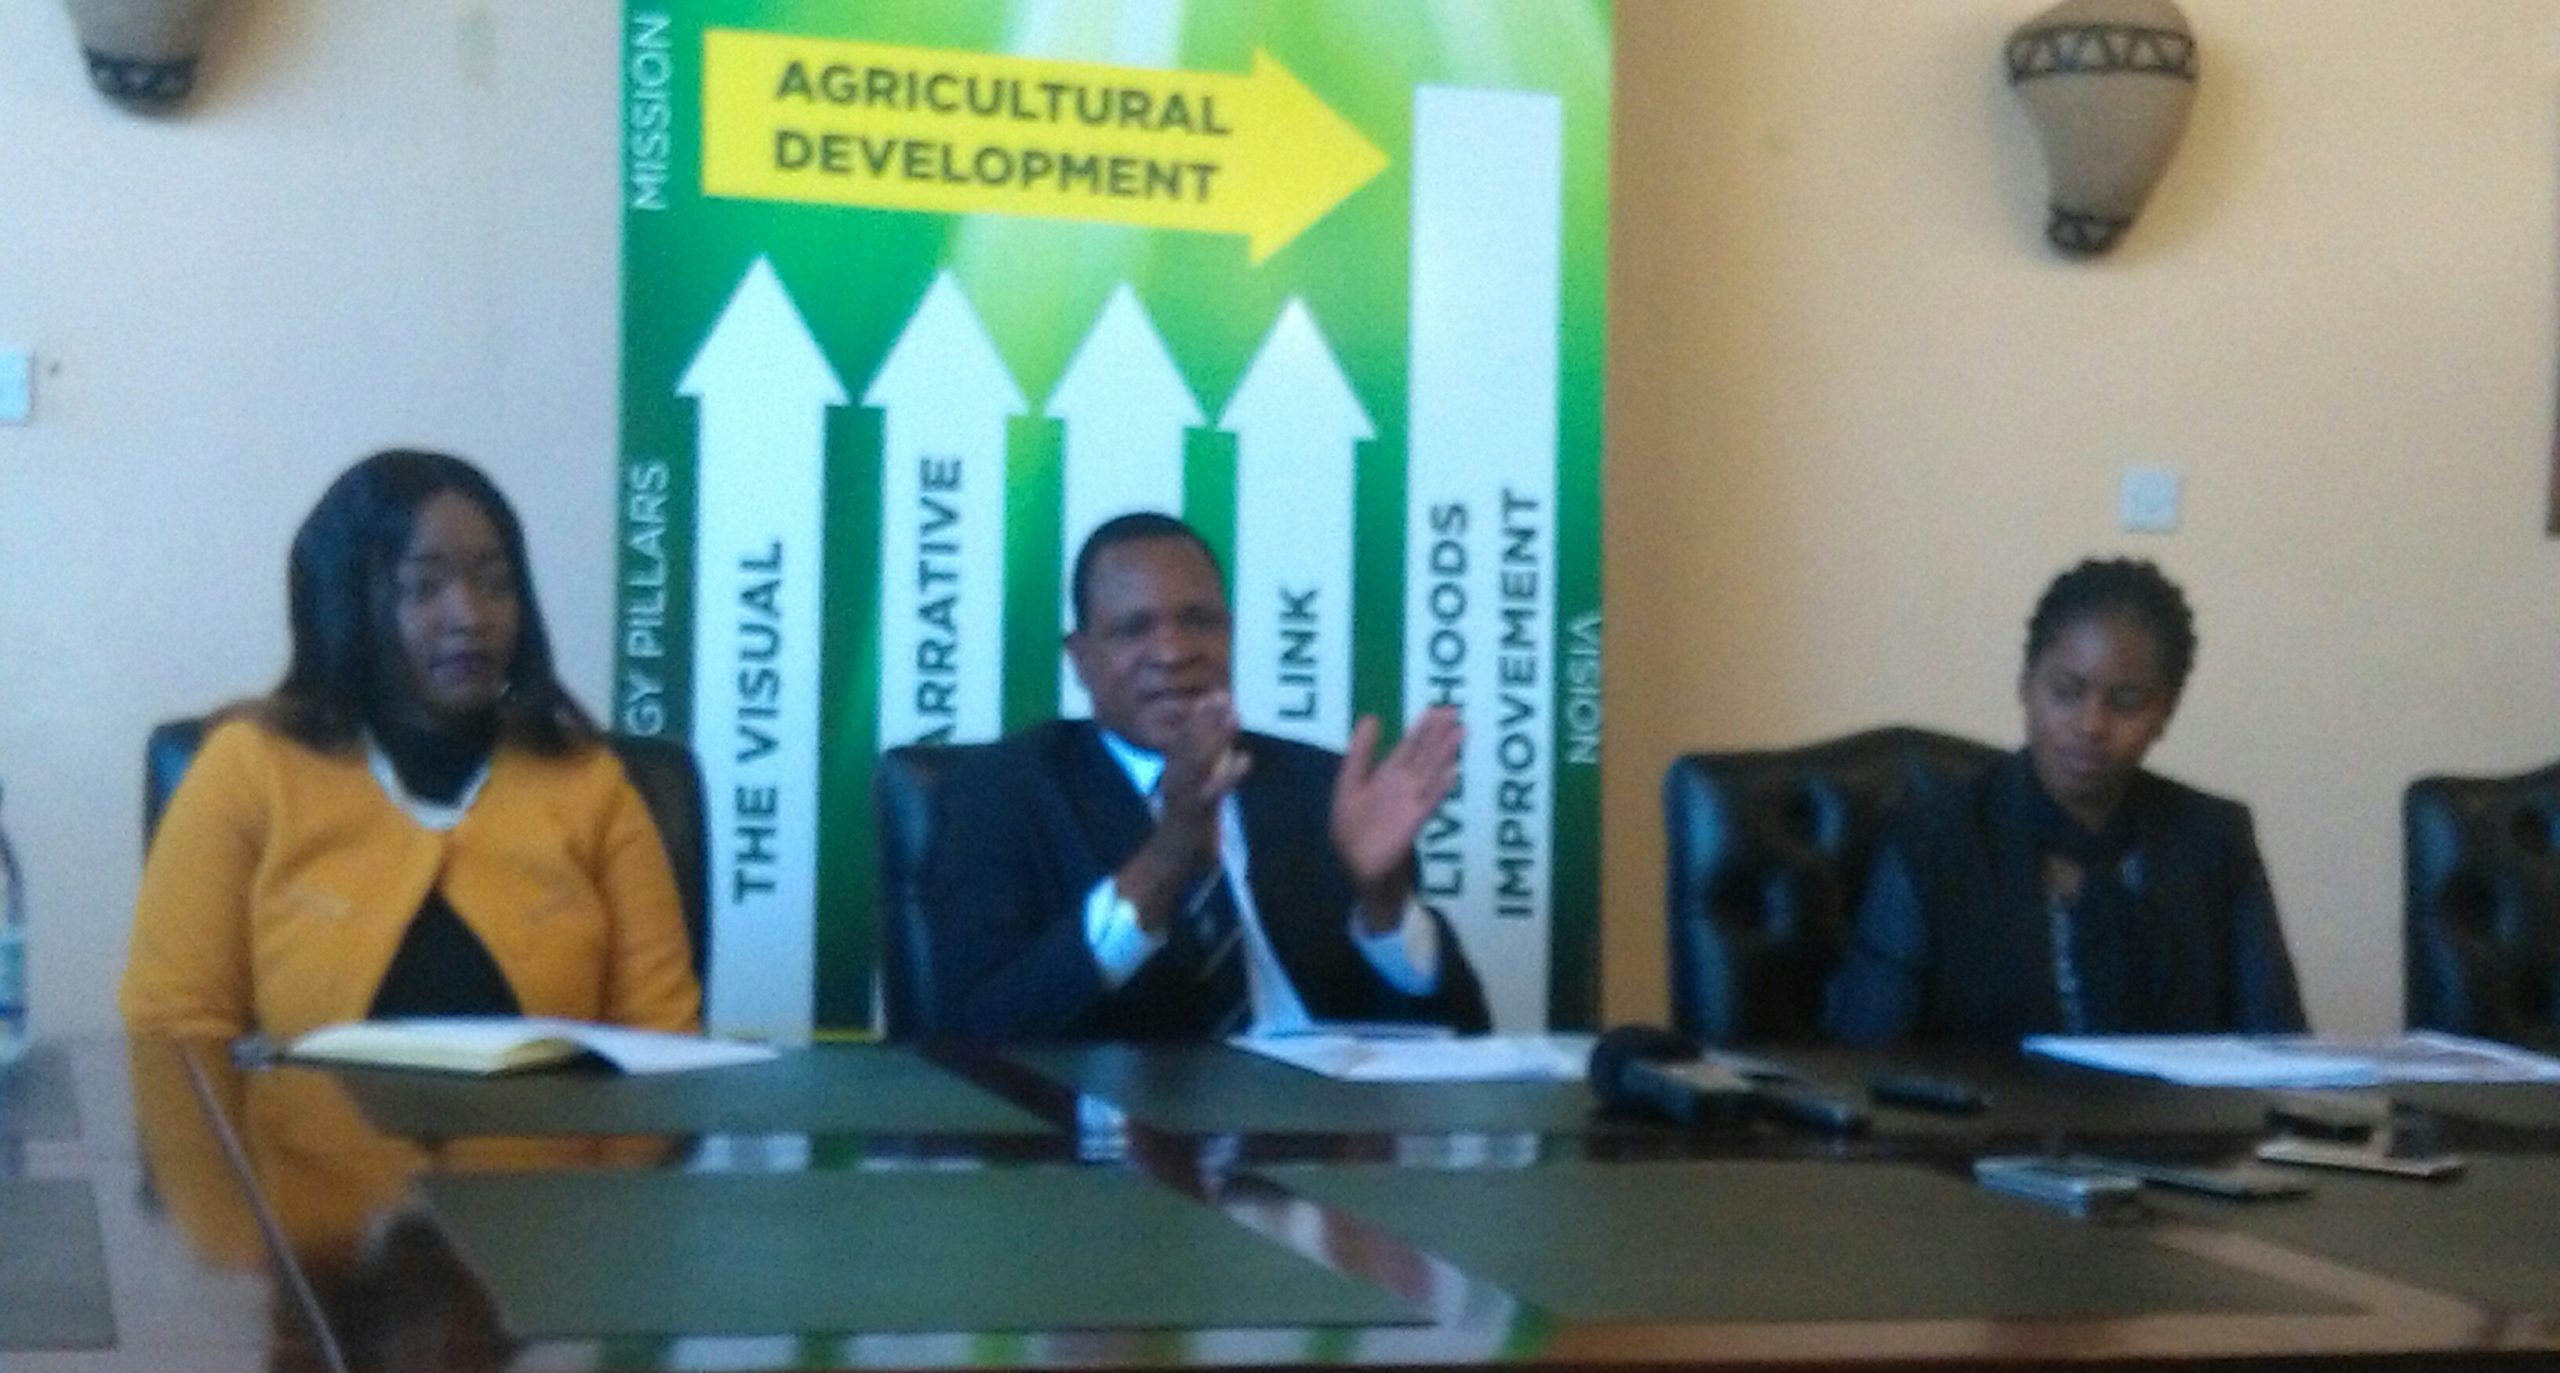 2017 Harare Agricultural Show comes as country attains food secure status